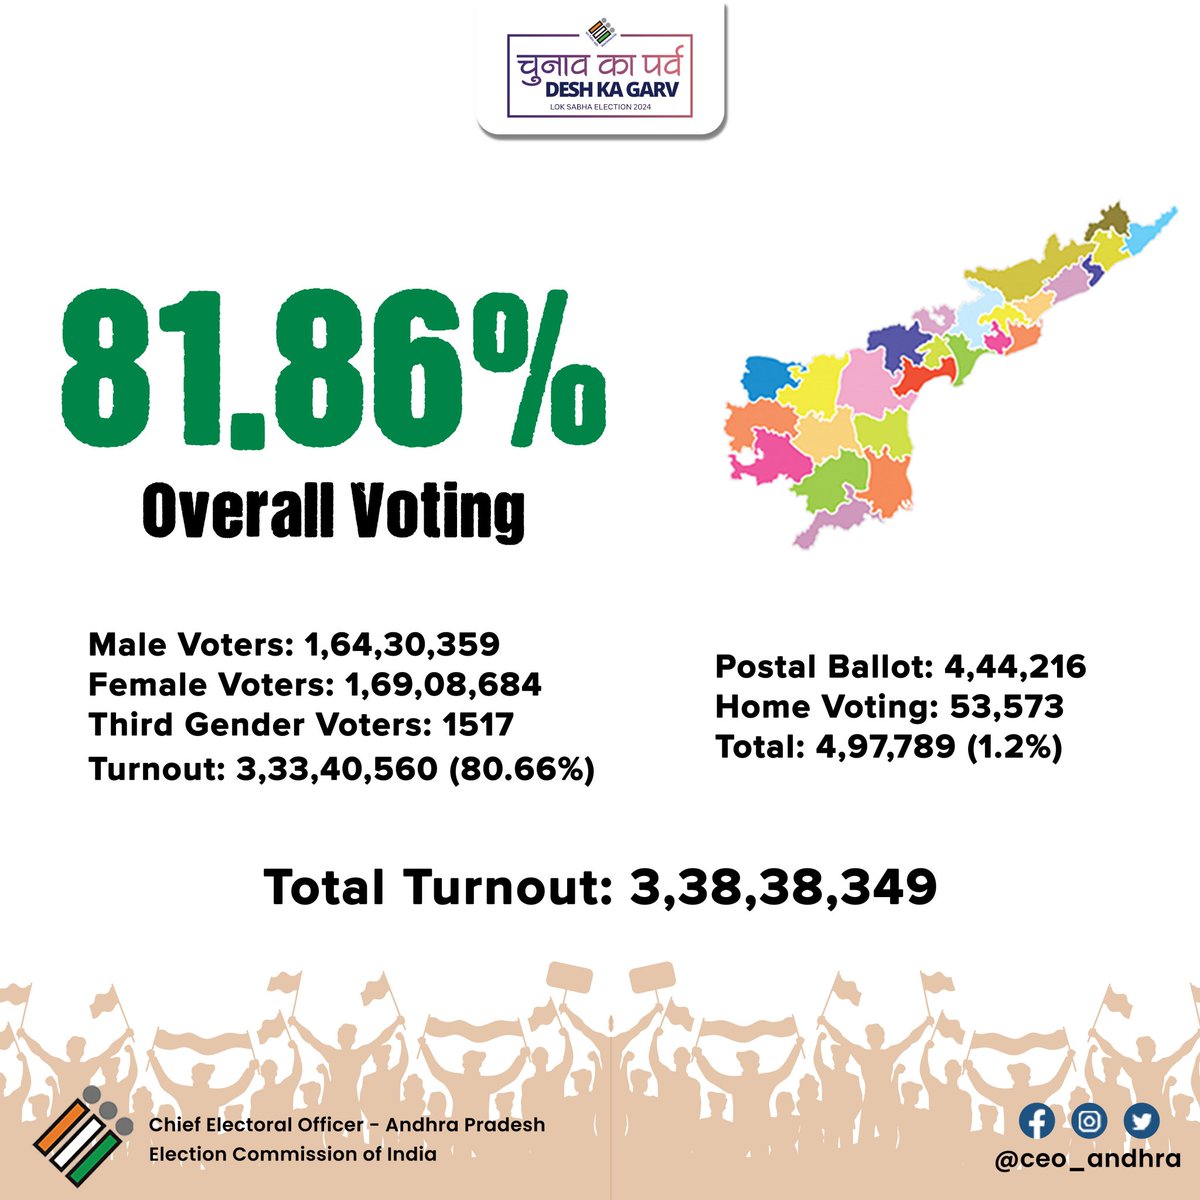 Overall voting in Andhrapradesh is 81.86%

Male voters: 1,64,30,359
Female voters: 1,69,08,684
Third gender voters: 1517
Turnout: 3,33,40,560 (80.66%)

Postal ballot: 4,44,216
Home voting: 53,573
Total: 4,97,789(1.2%)

Total Turnout: 3,38,38,349

#AndhraPradeshElections2024